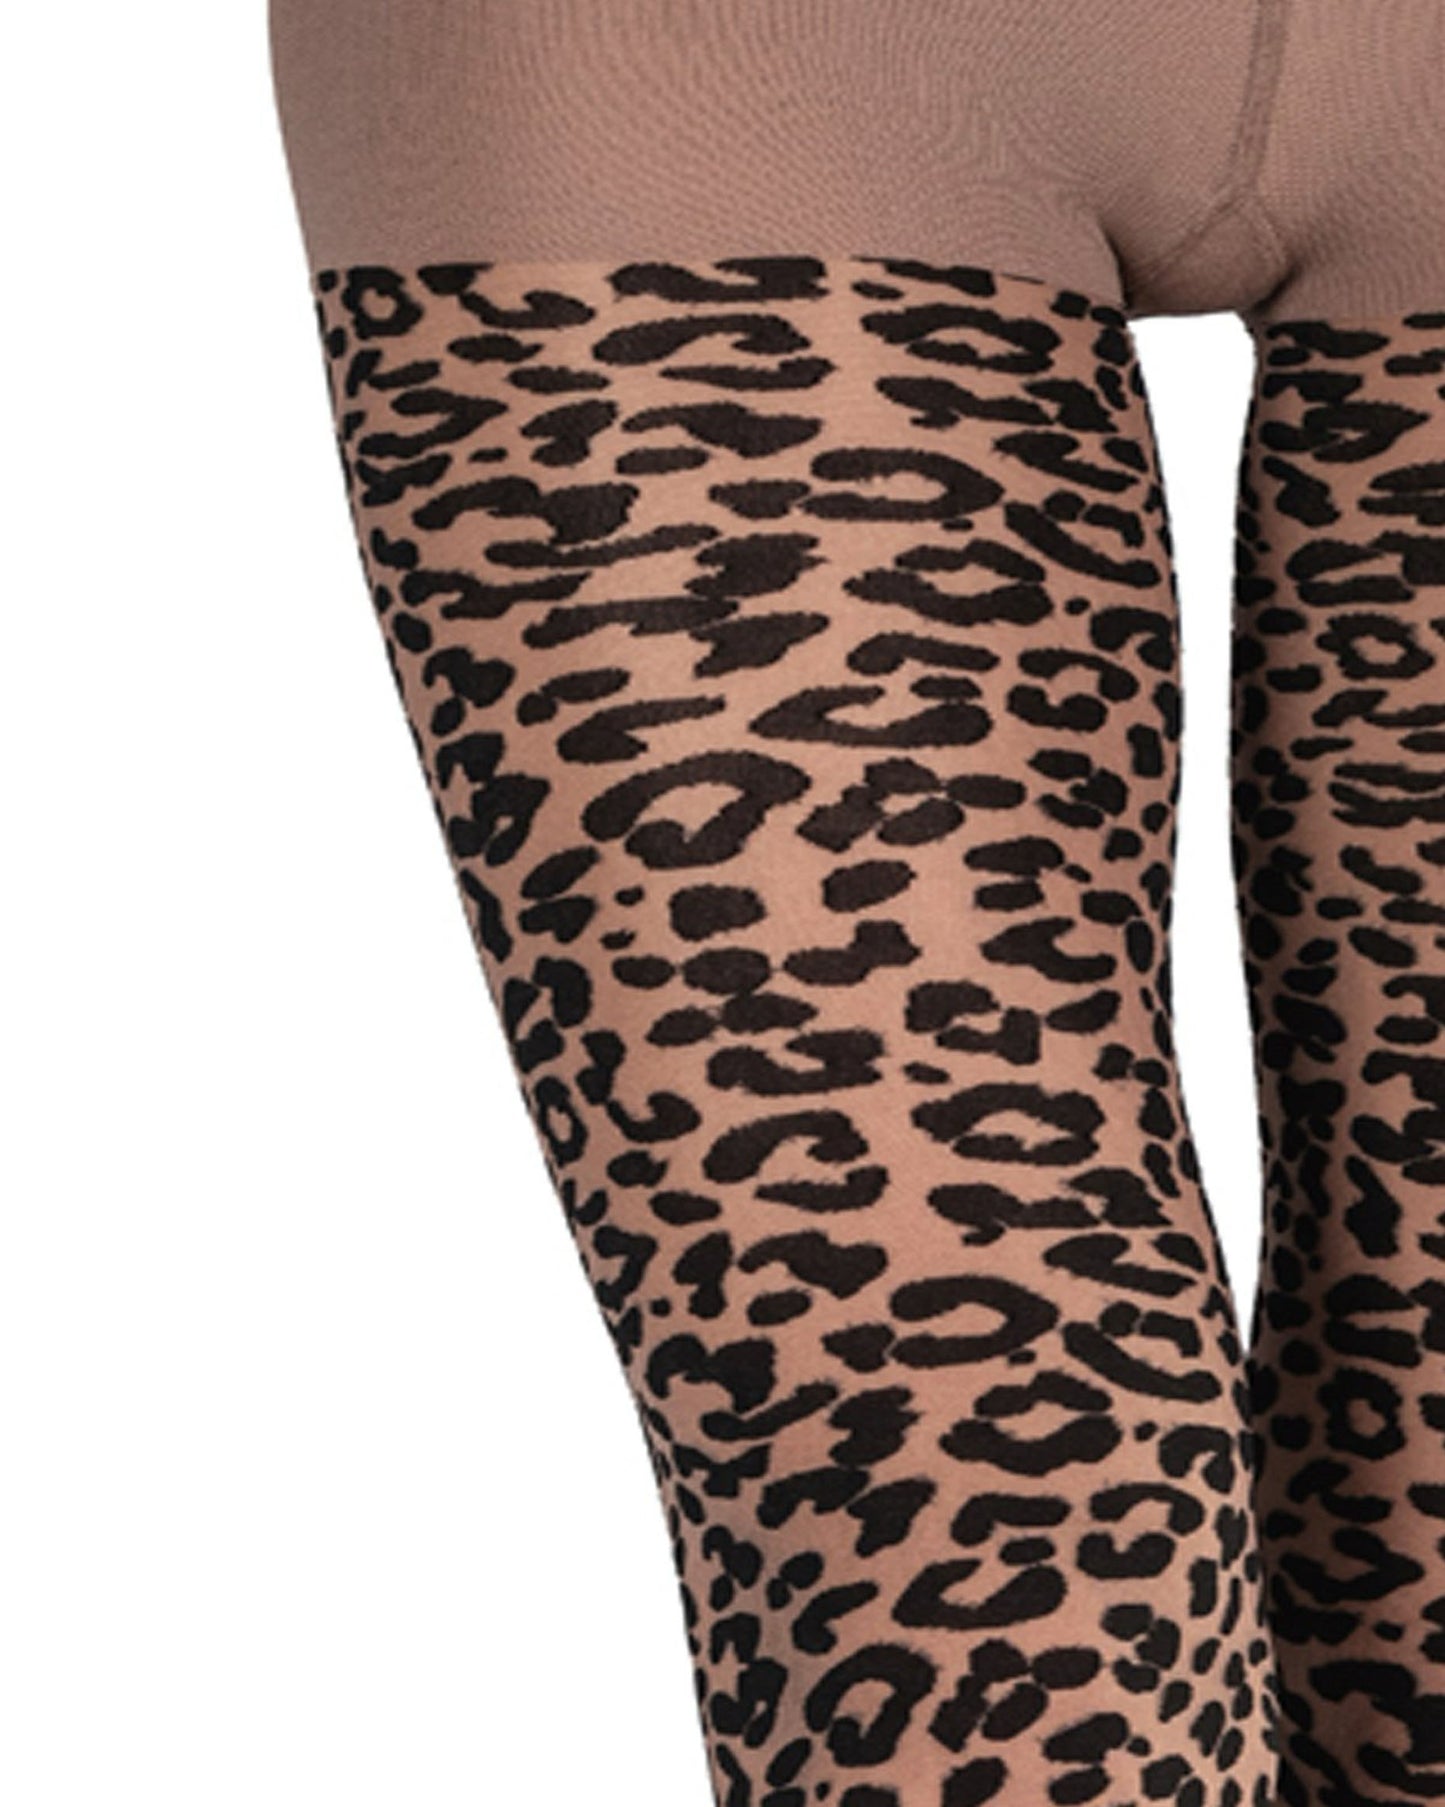 Emilio Cavallini Leopard Tights - sheer tan fashion tights with a black opaque animal print pattern, flat seams and gusset.